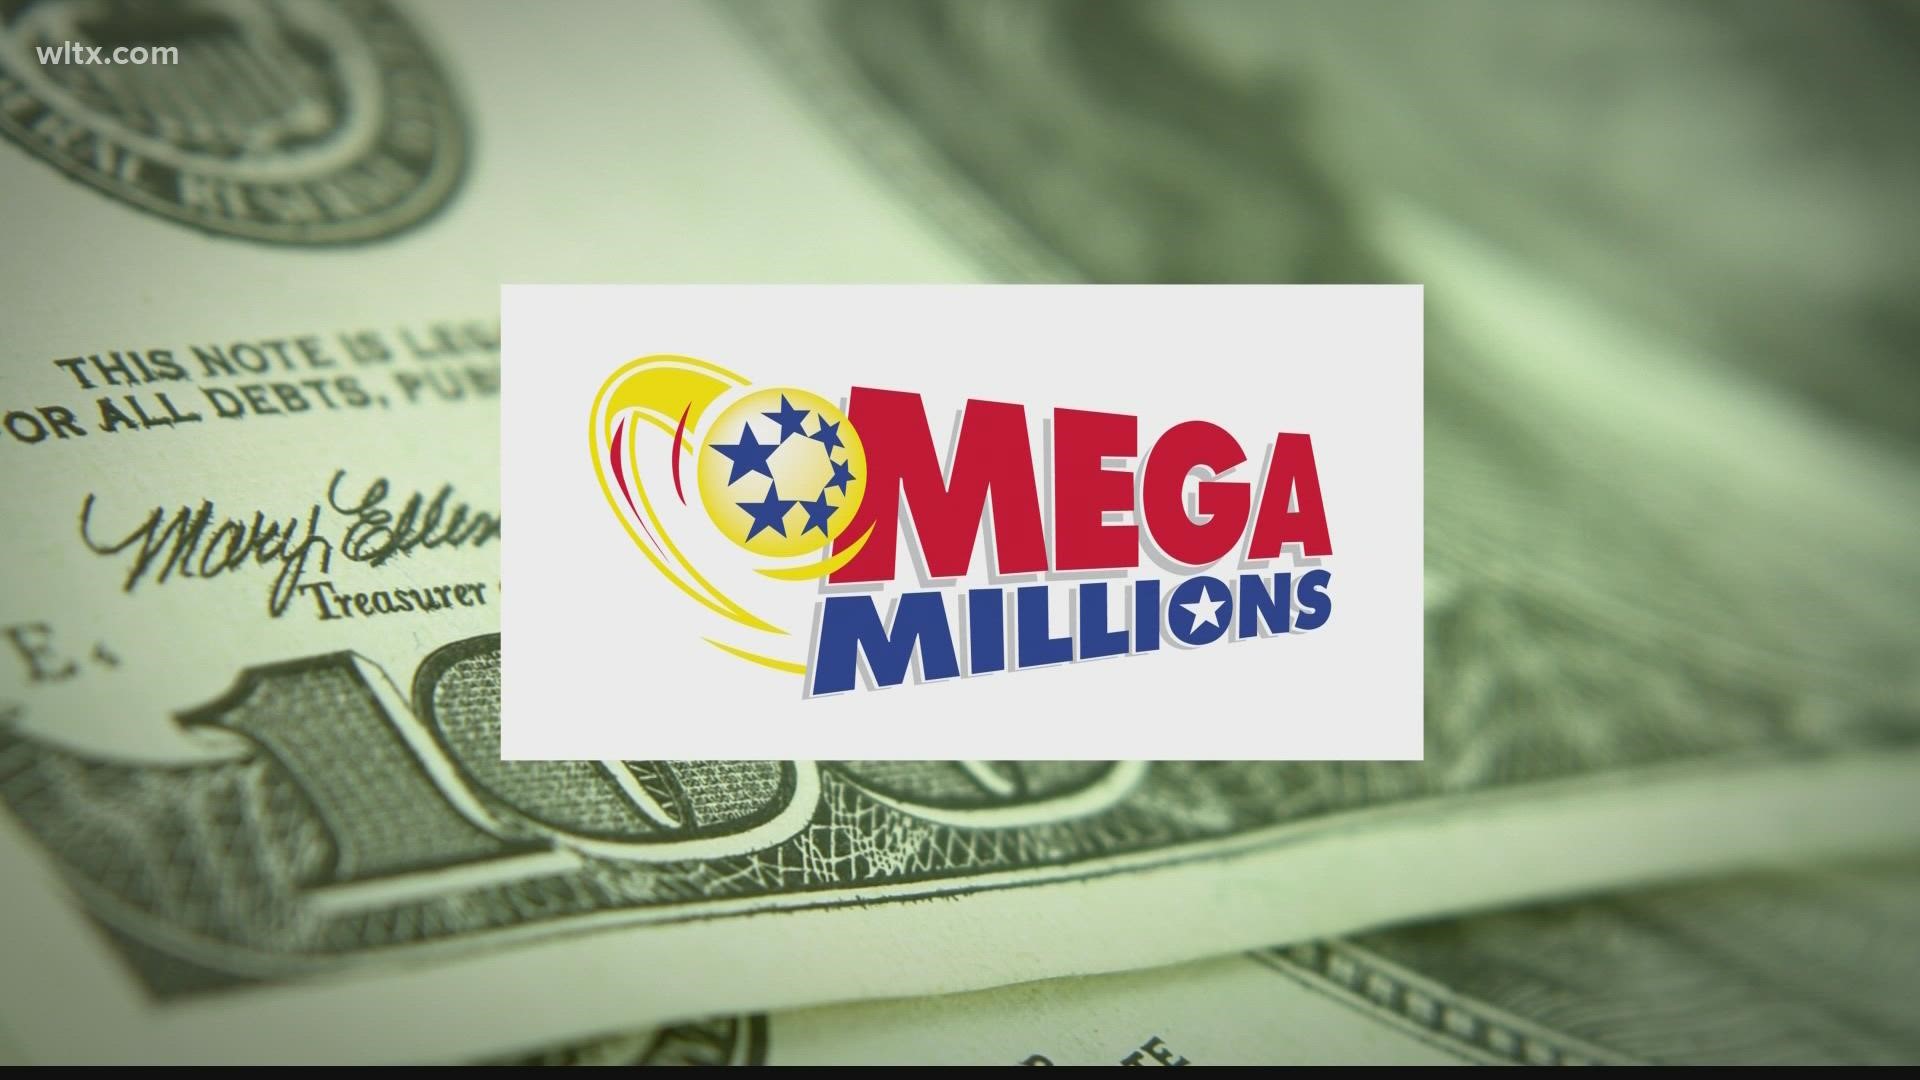 The next drawing is set for Tuesday, and if someone matches all six numbers, they will win the sixth-largest prize in Mega Millions history.